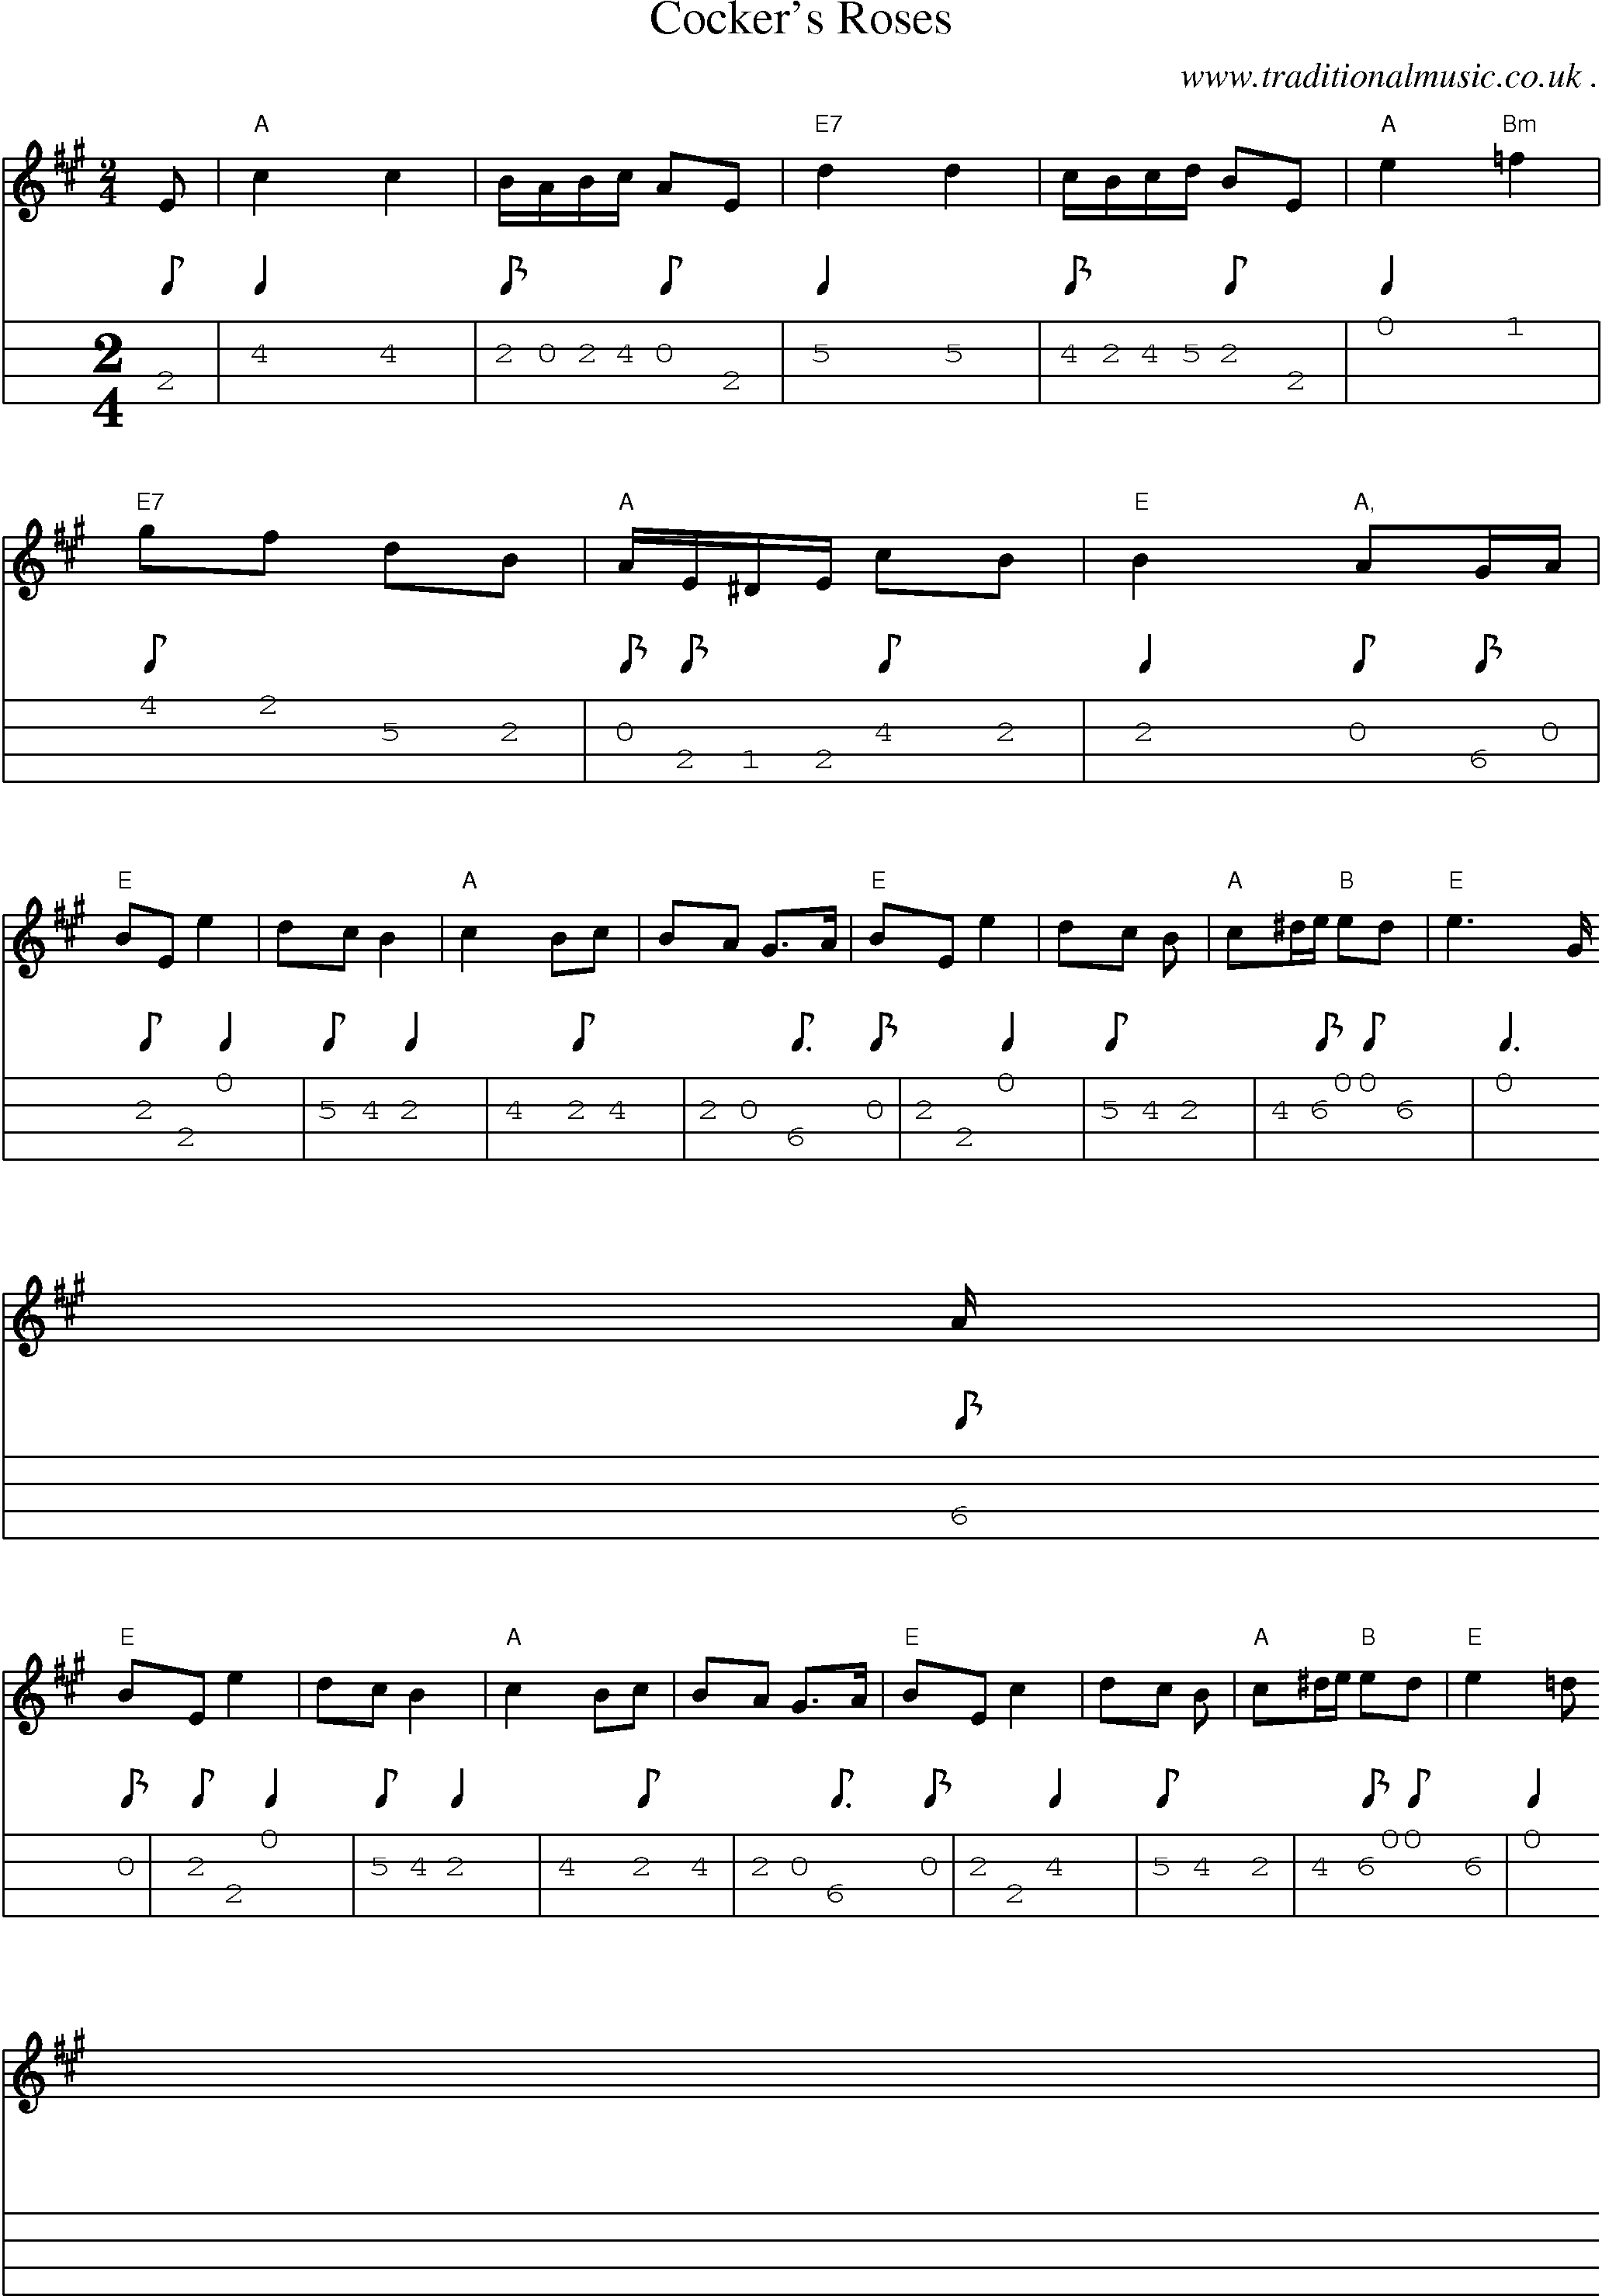 Sheet-music  score, Chords and Mandolin Tabs for Cockers Roses